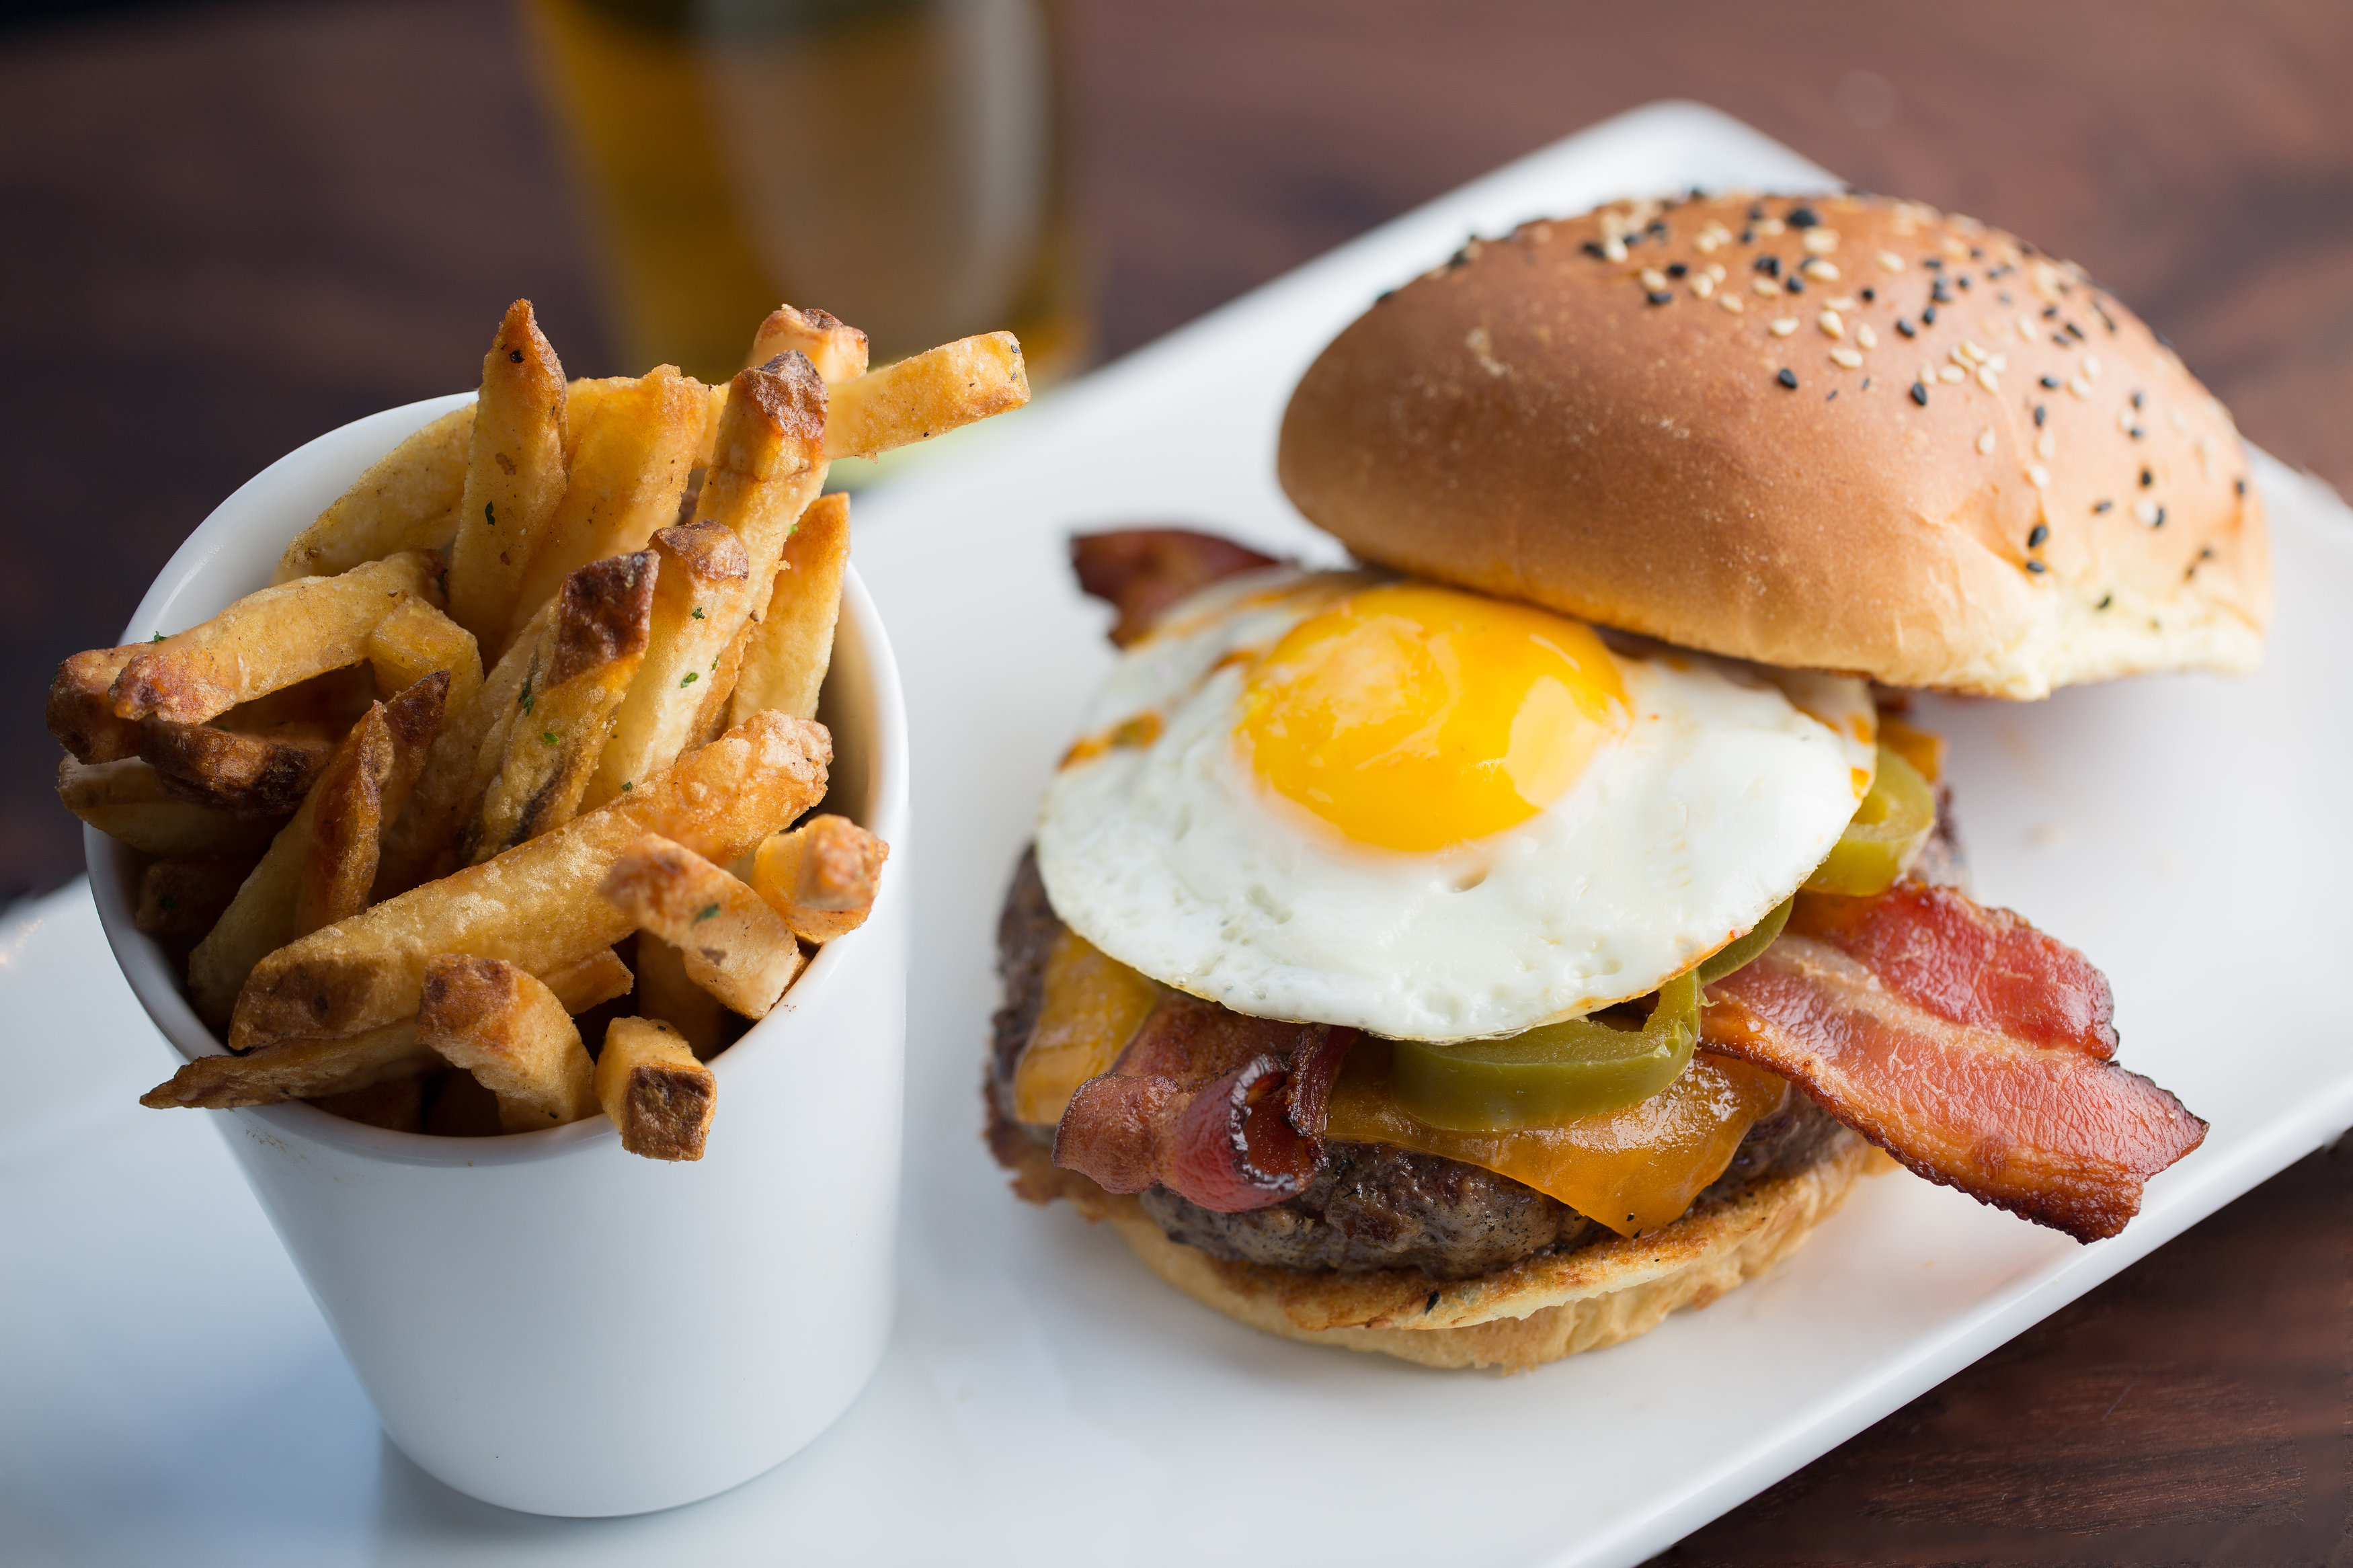 Burger with fried egg and bacon and a side of fries at Eureka! in Huntington Beach